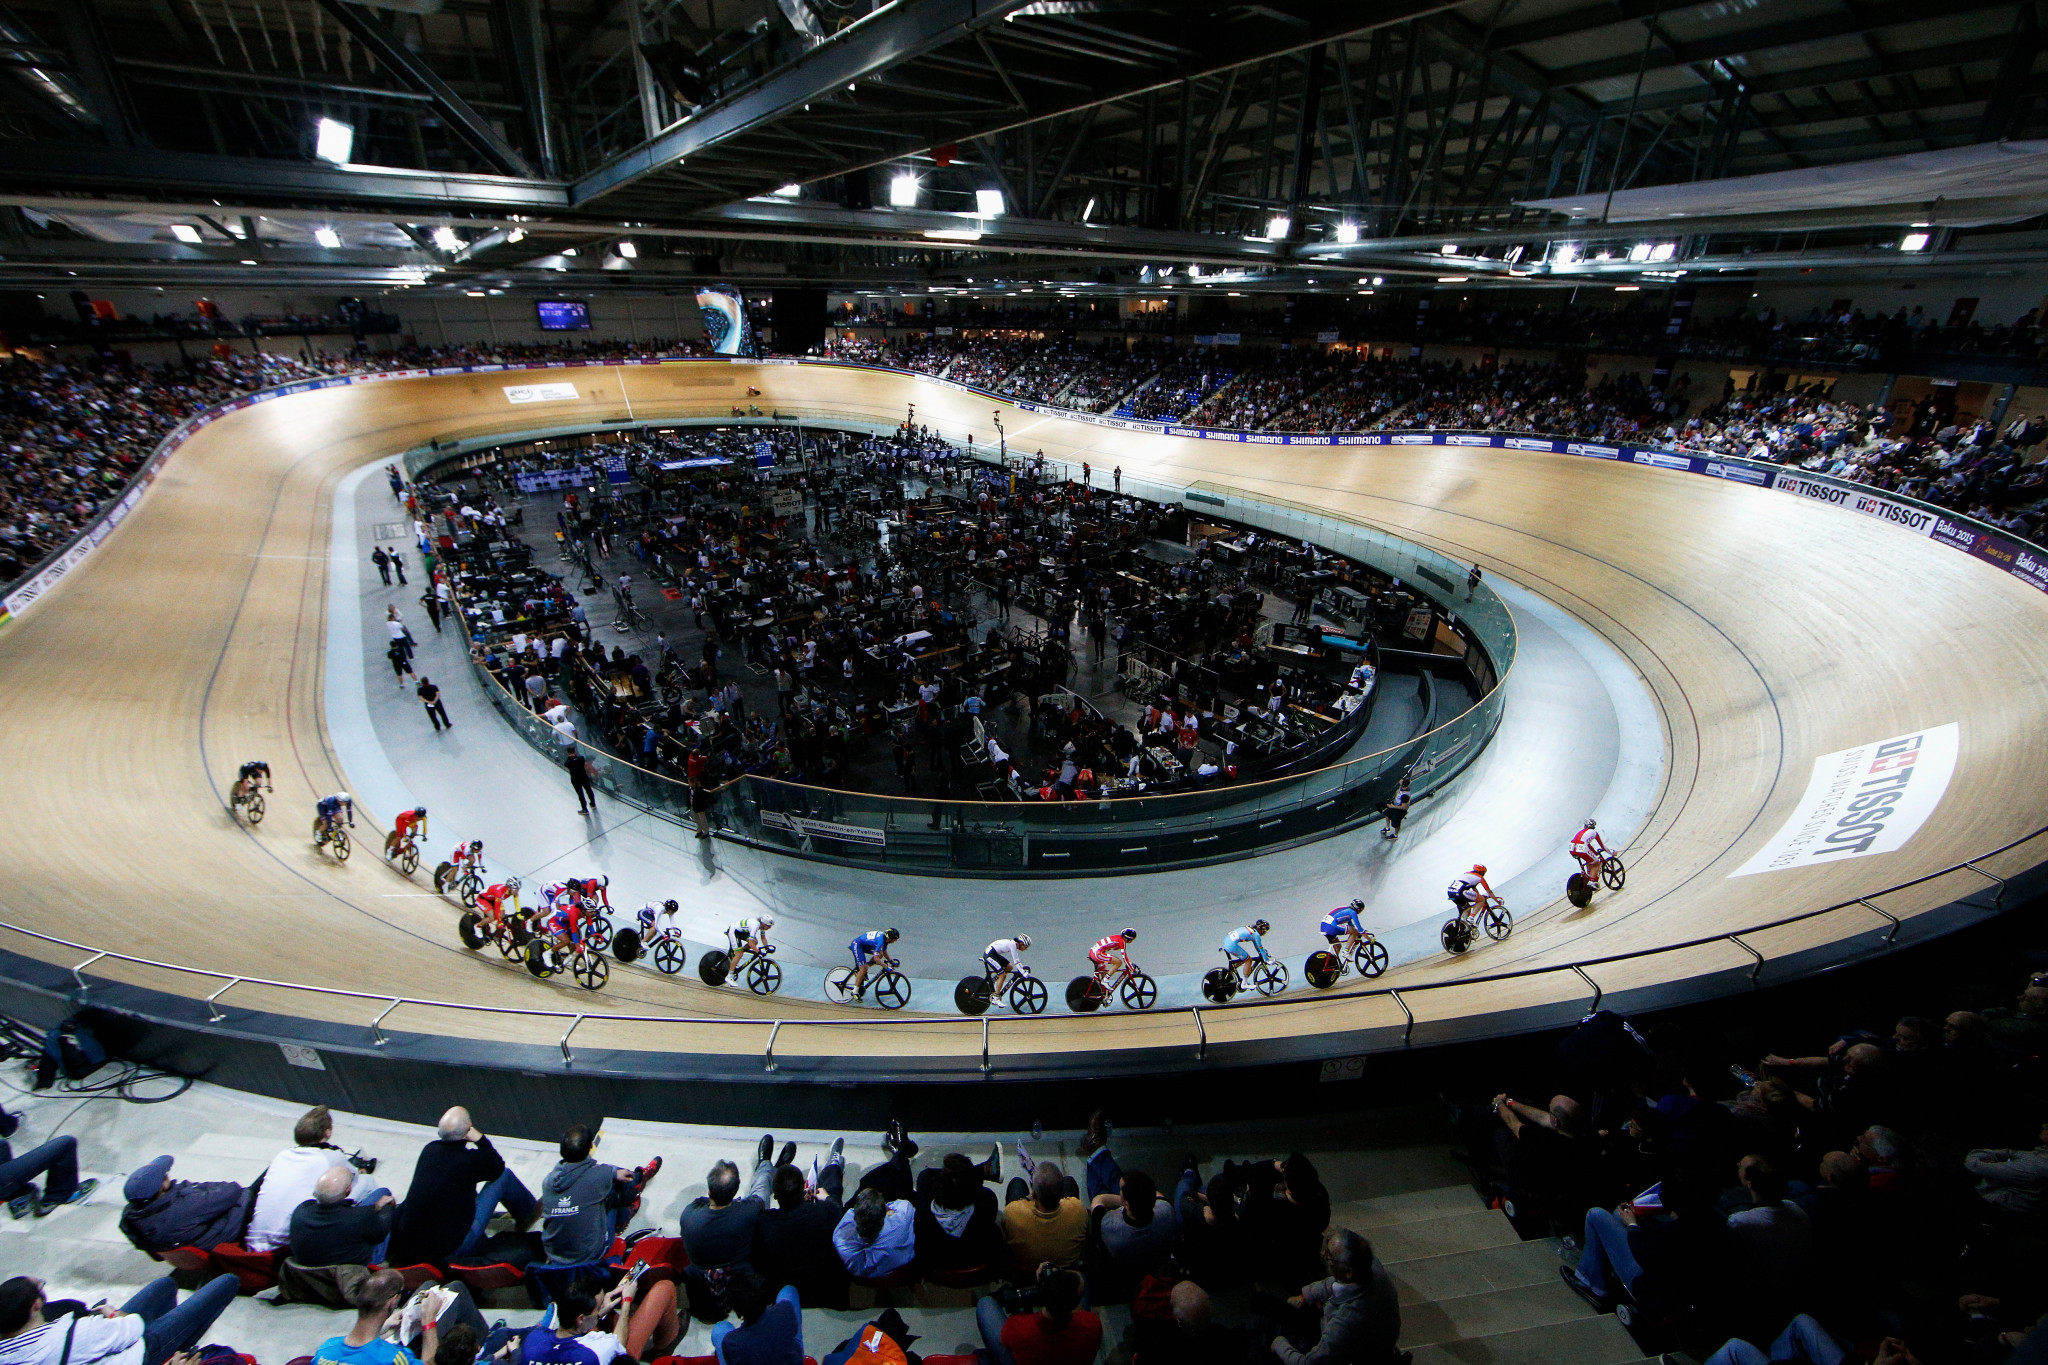 Paris 2024 velodrome in Montigny-le-Bretonneux to stage this year's Para-Cycling Track World Championships